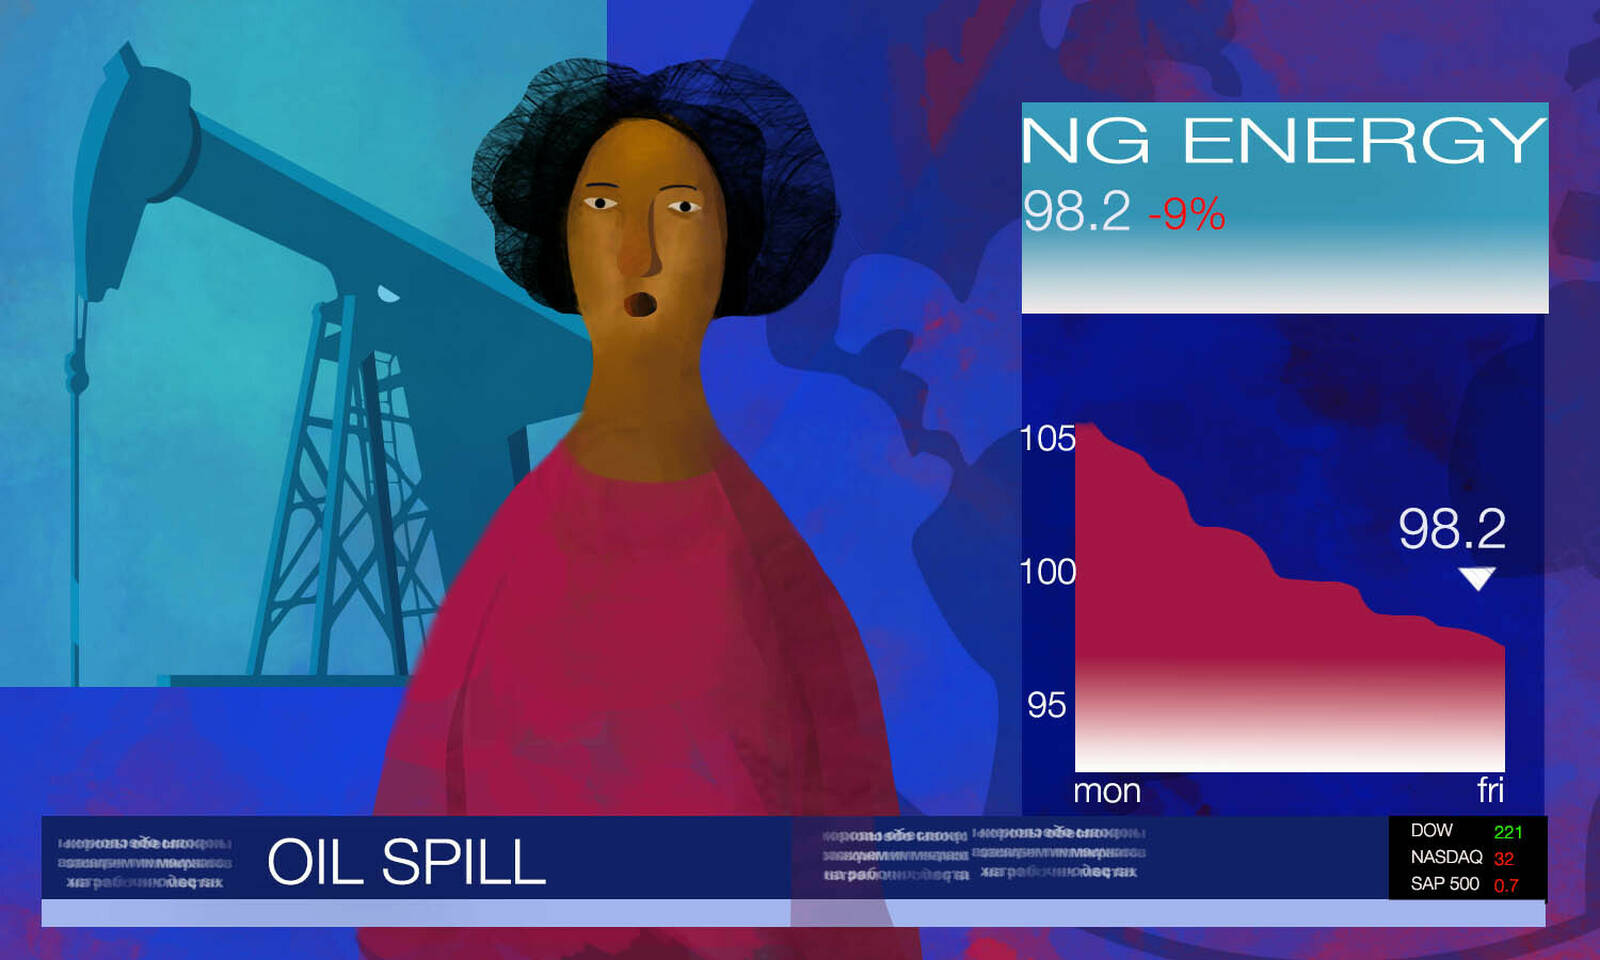 news reporter describes oil spill with NG Energy stock ticker